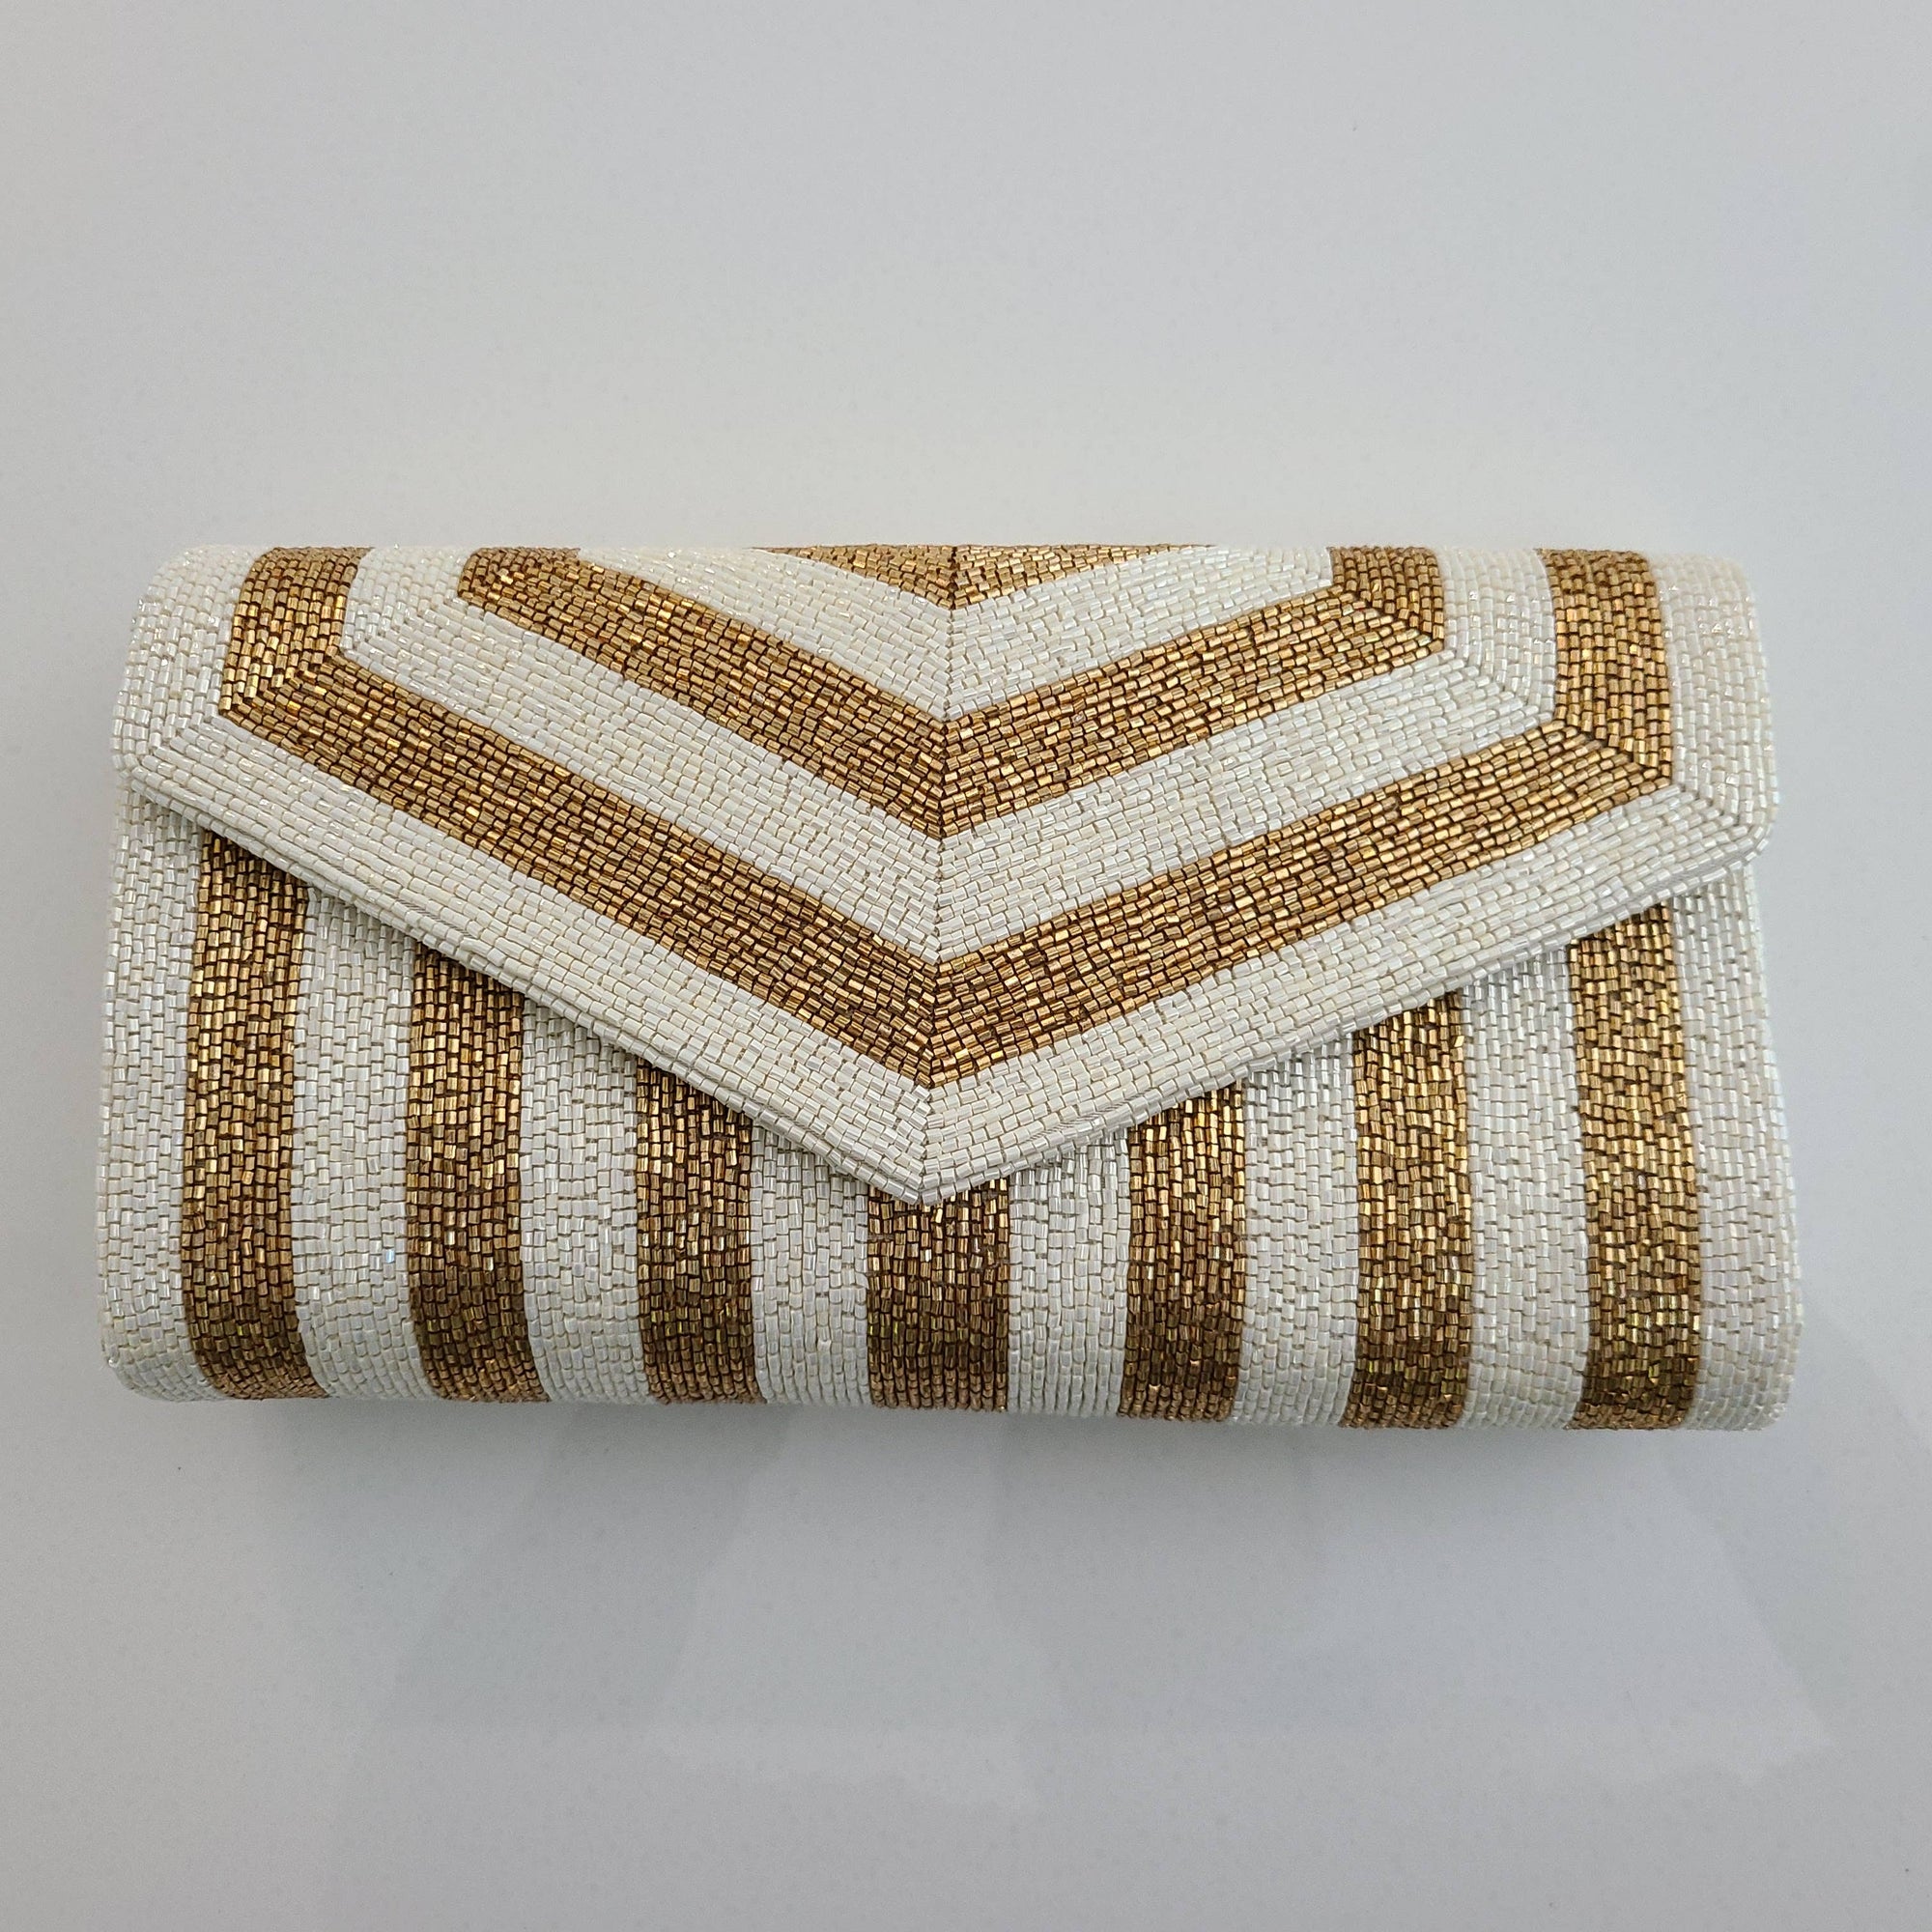 Gold & White Beaded Clutch